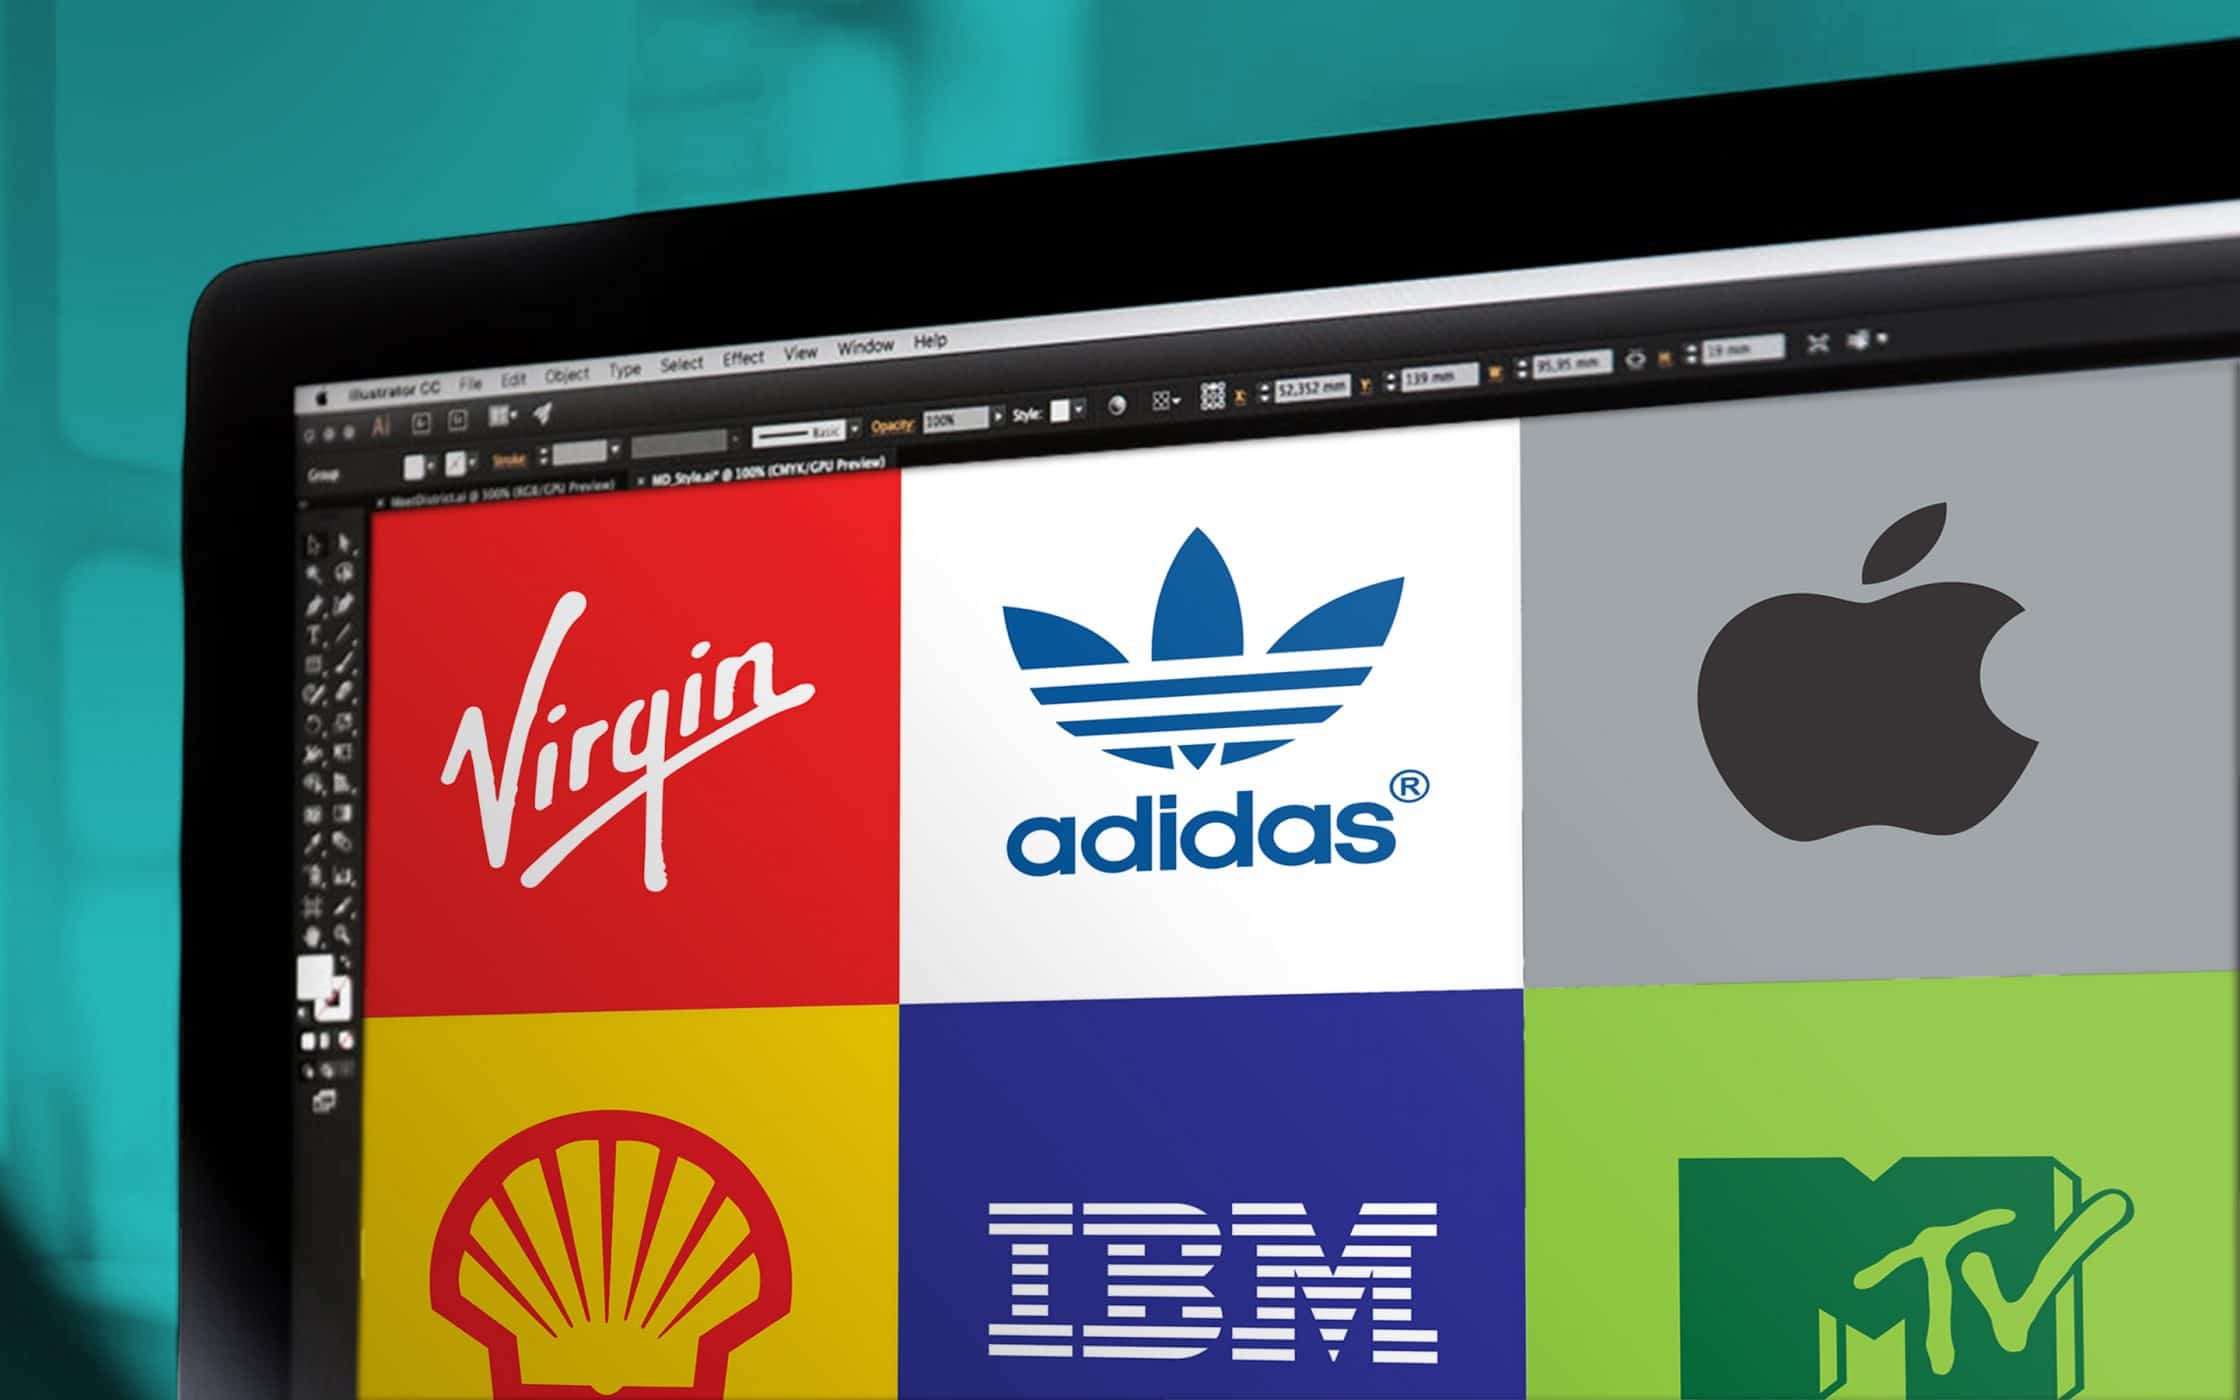 Red Help Logo - What Makes A Good Logo? Famous Company Logos To Inspire Your Own